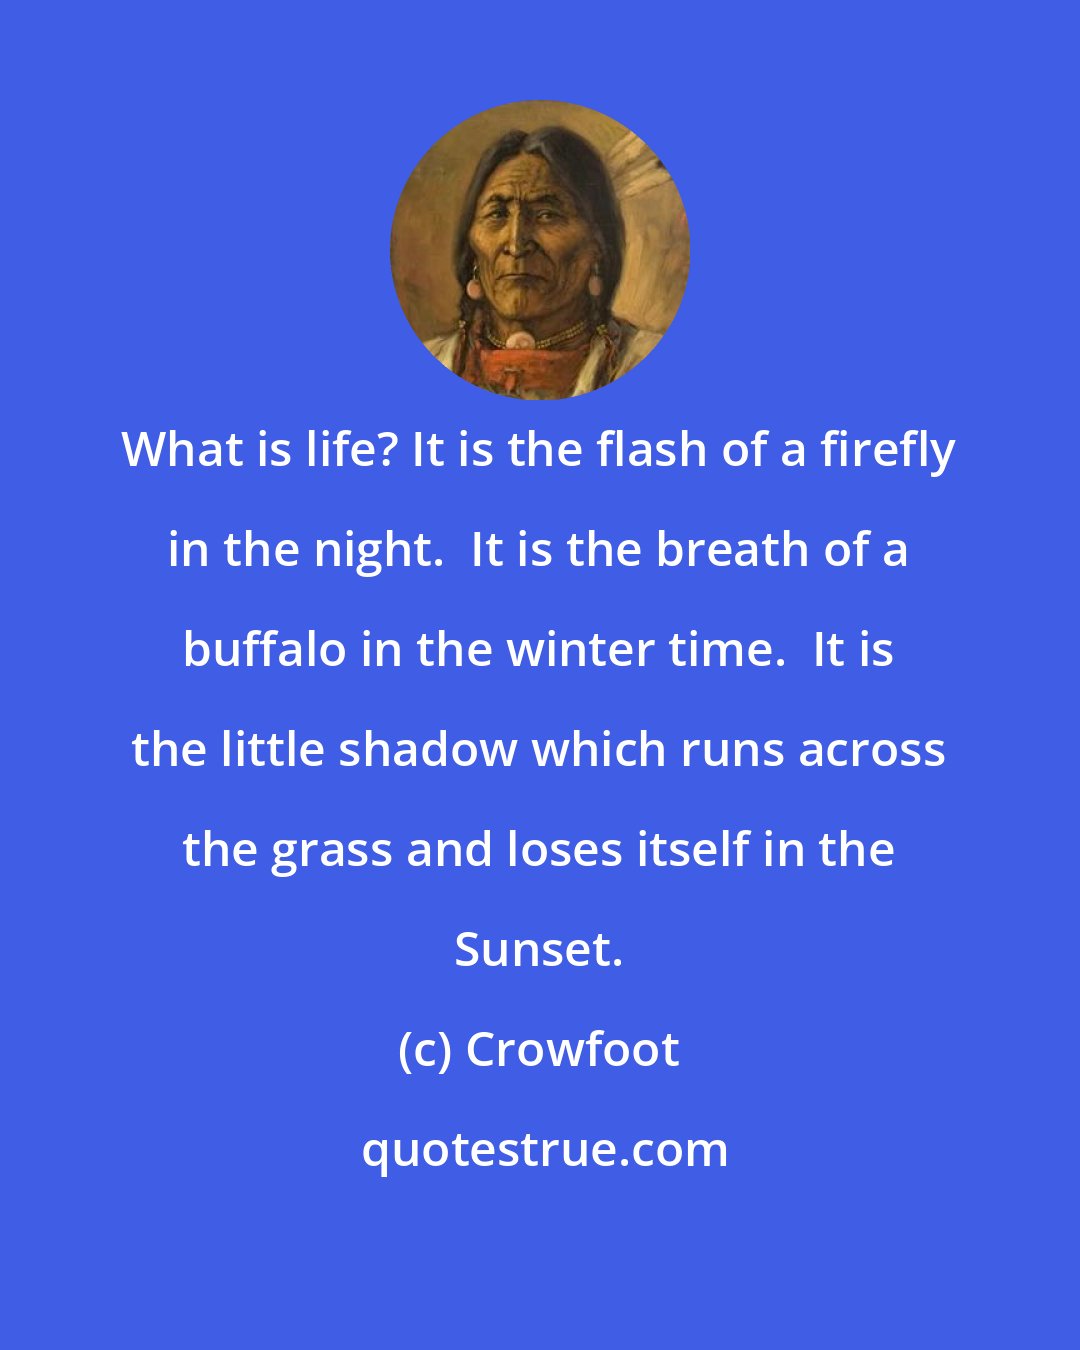 Crowfoot: What is life? It is the flash of a firefly in the night.  It is the breath of a buffalo in the winter time.  It is the little shadow which runs across the grass and loses itself in the Sunset.